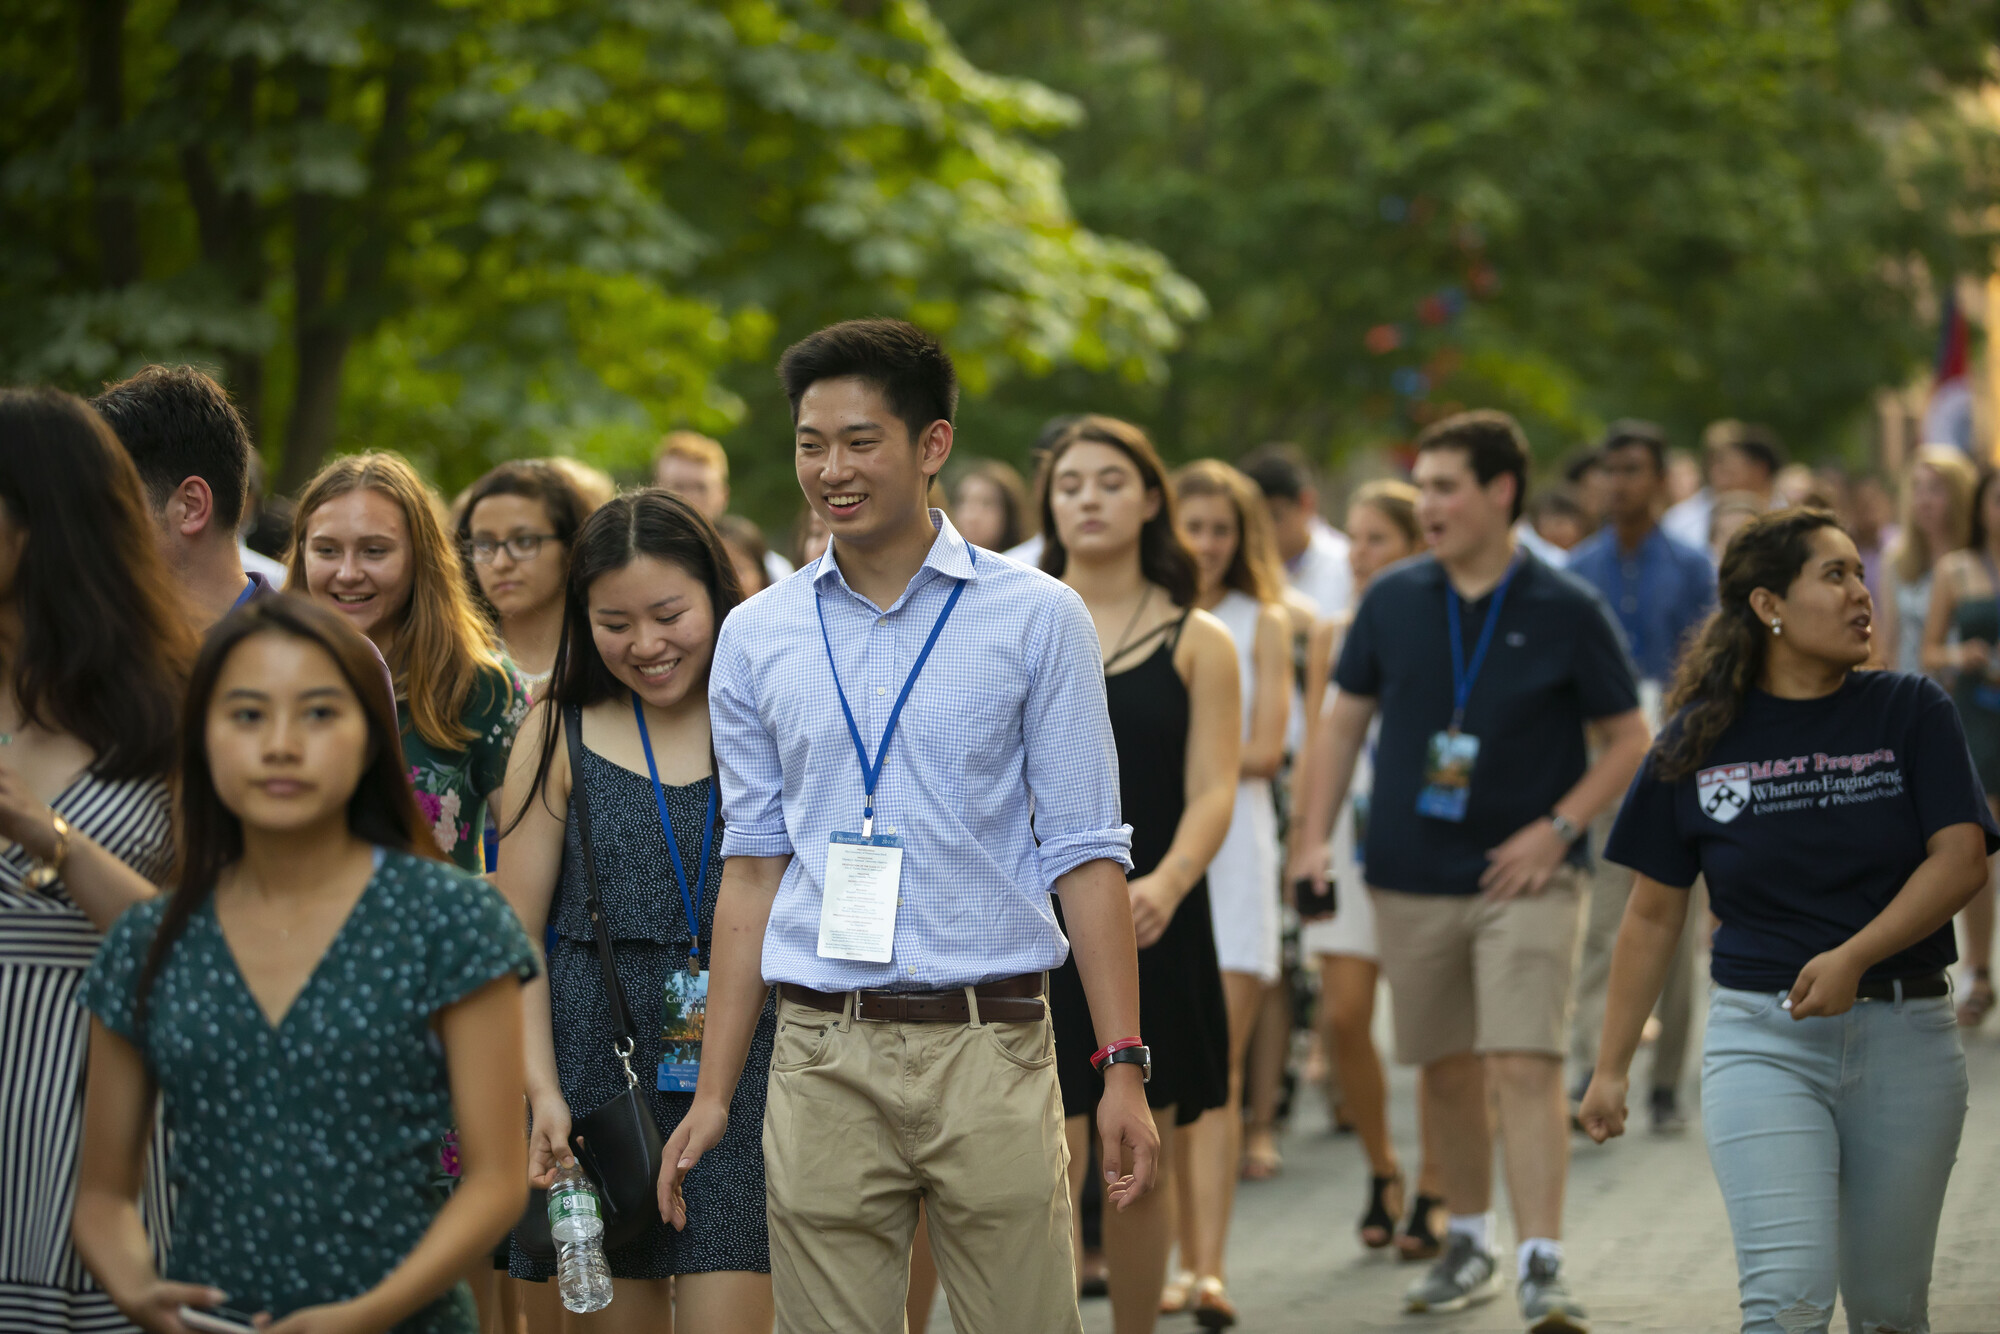 Students arriving at the 2018 Convocation ceremony